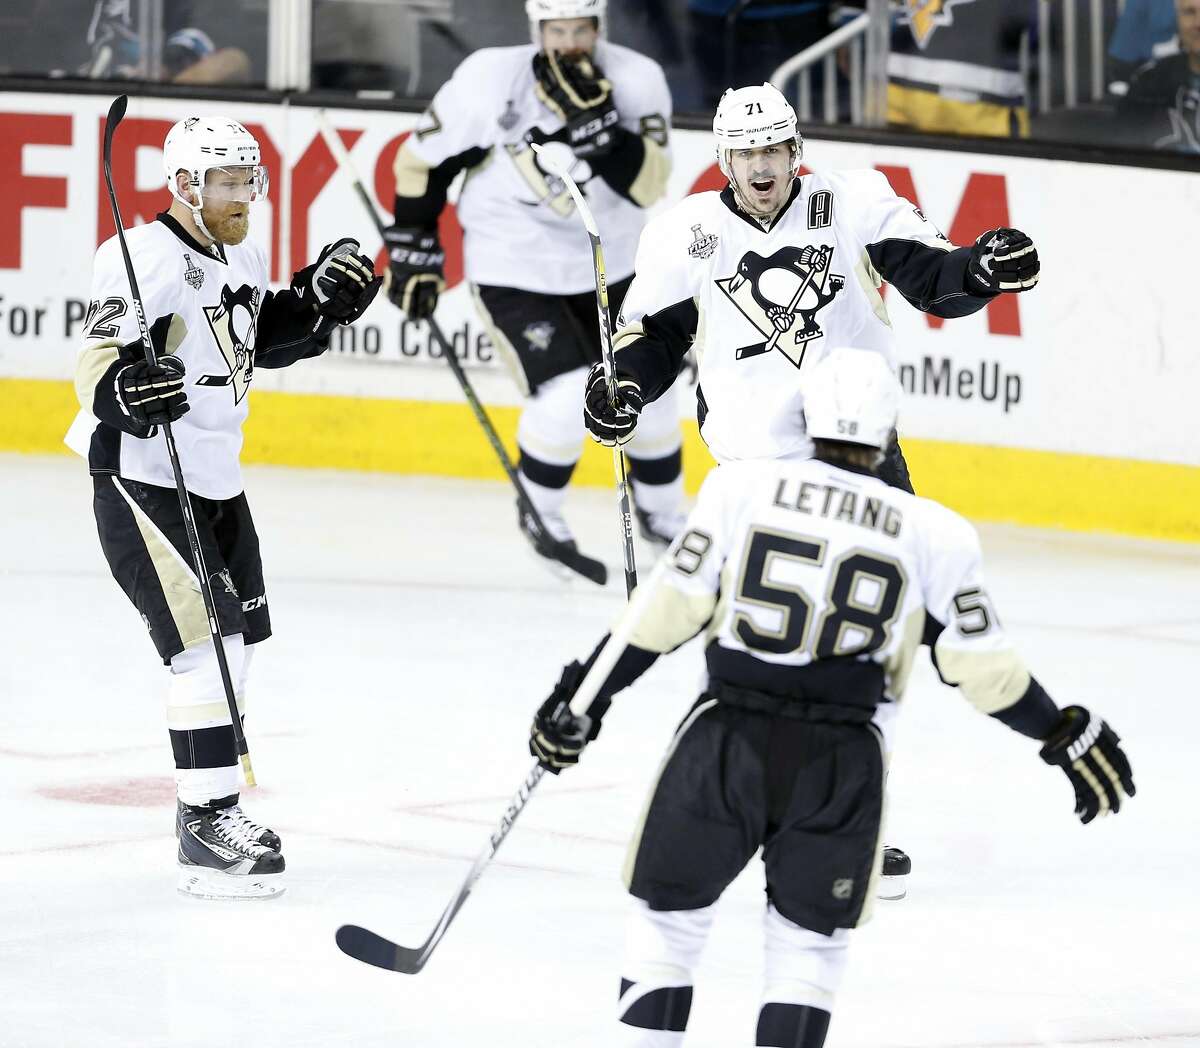 Pittsburgh Penguins' Evgeni Malkin celebrates his goal with Patric Hornqvist and Kris Letang in 2nd period against San Jose Sharks of Game 4 of Stanley Cup Final at SAP Center in San Jose, Calif., on Monday, June 6, 2016.